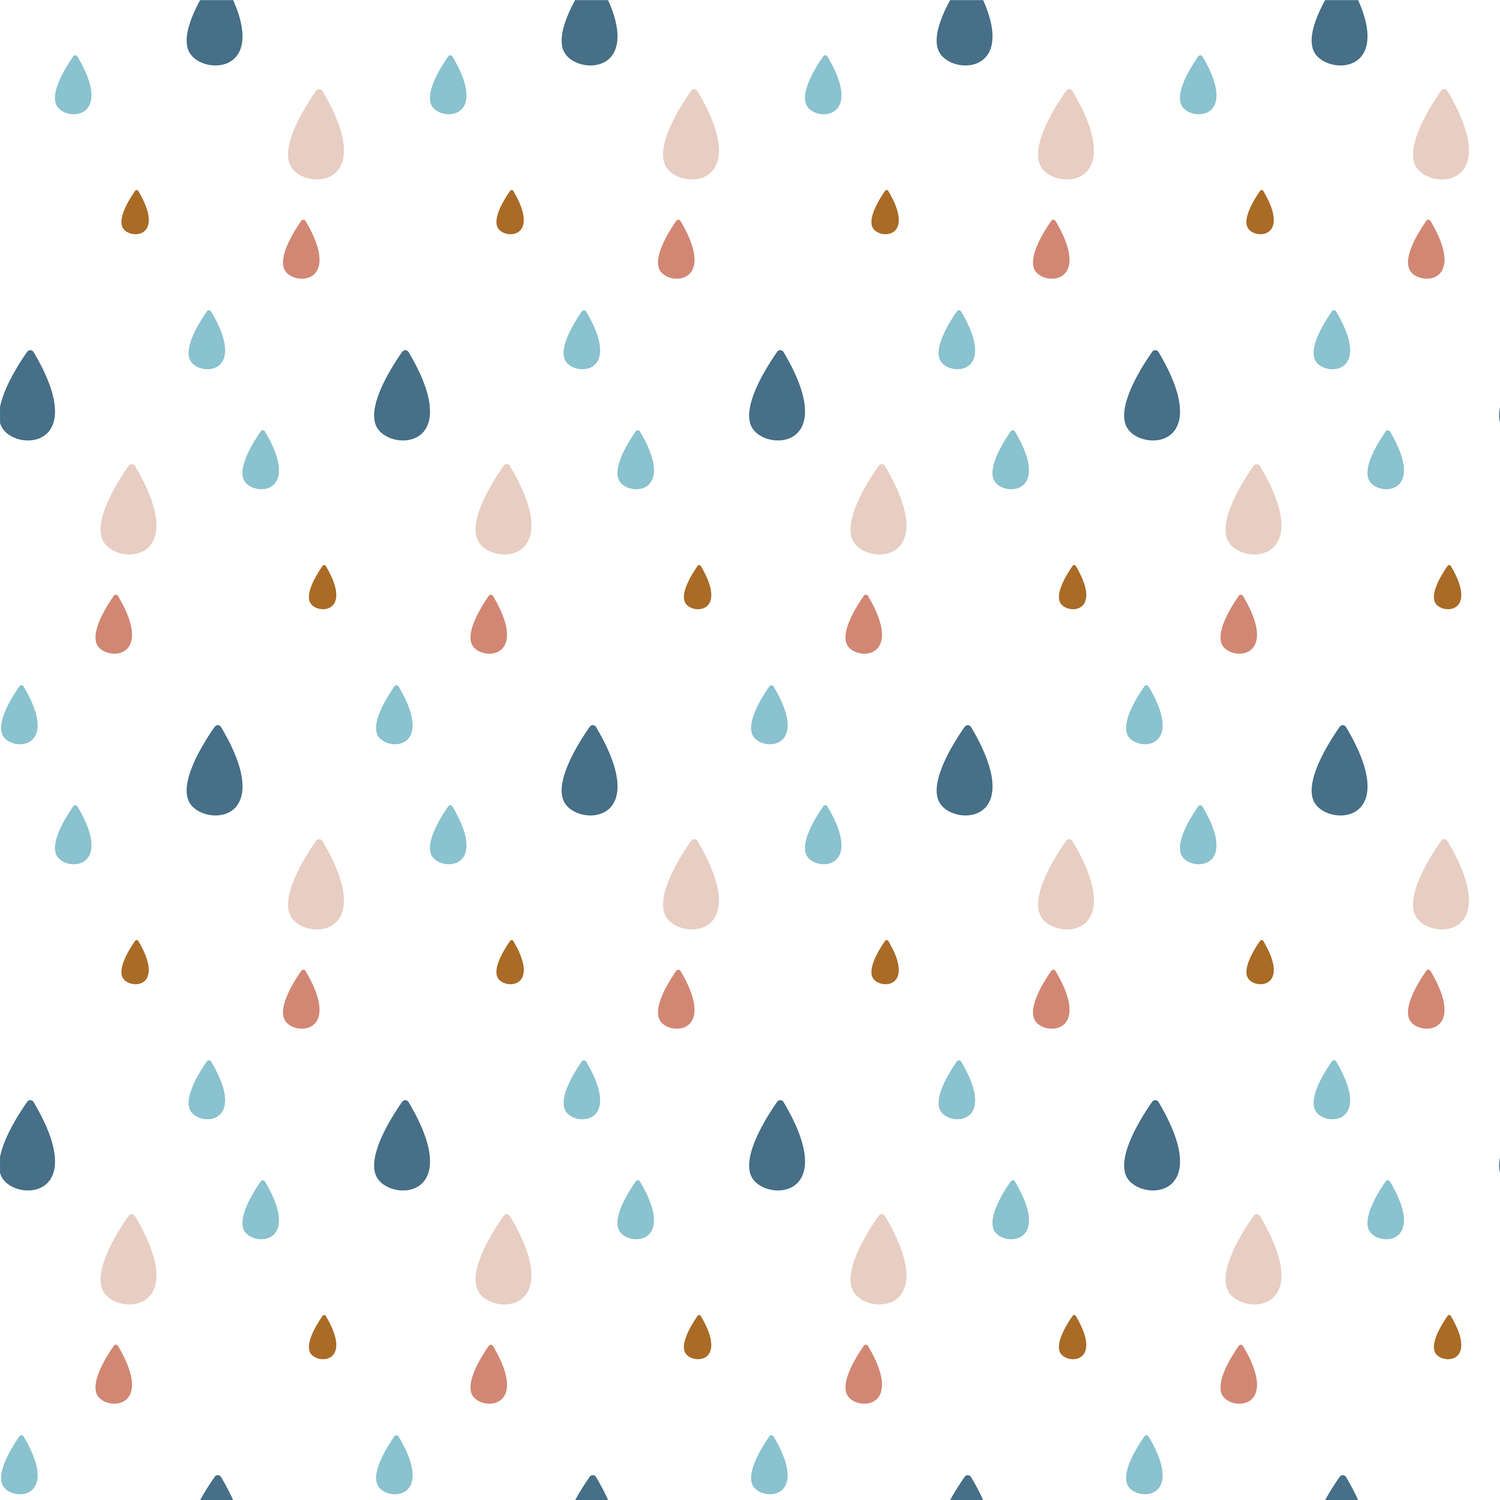             Children's Room Wallpaper with Colourful Water Drops - Smooth & Matt Non-woven
        